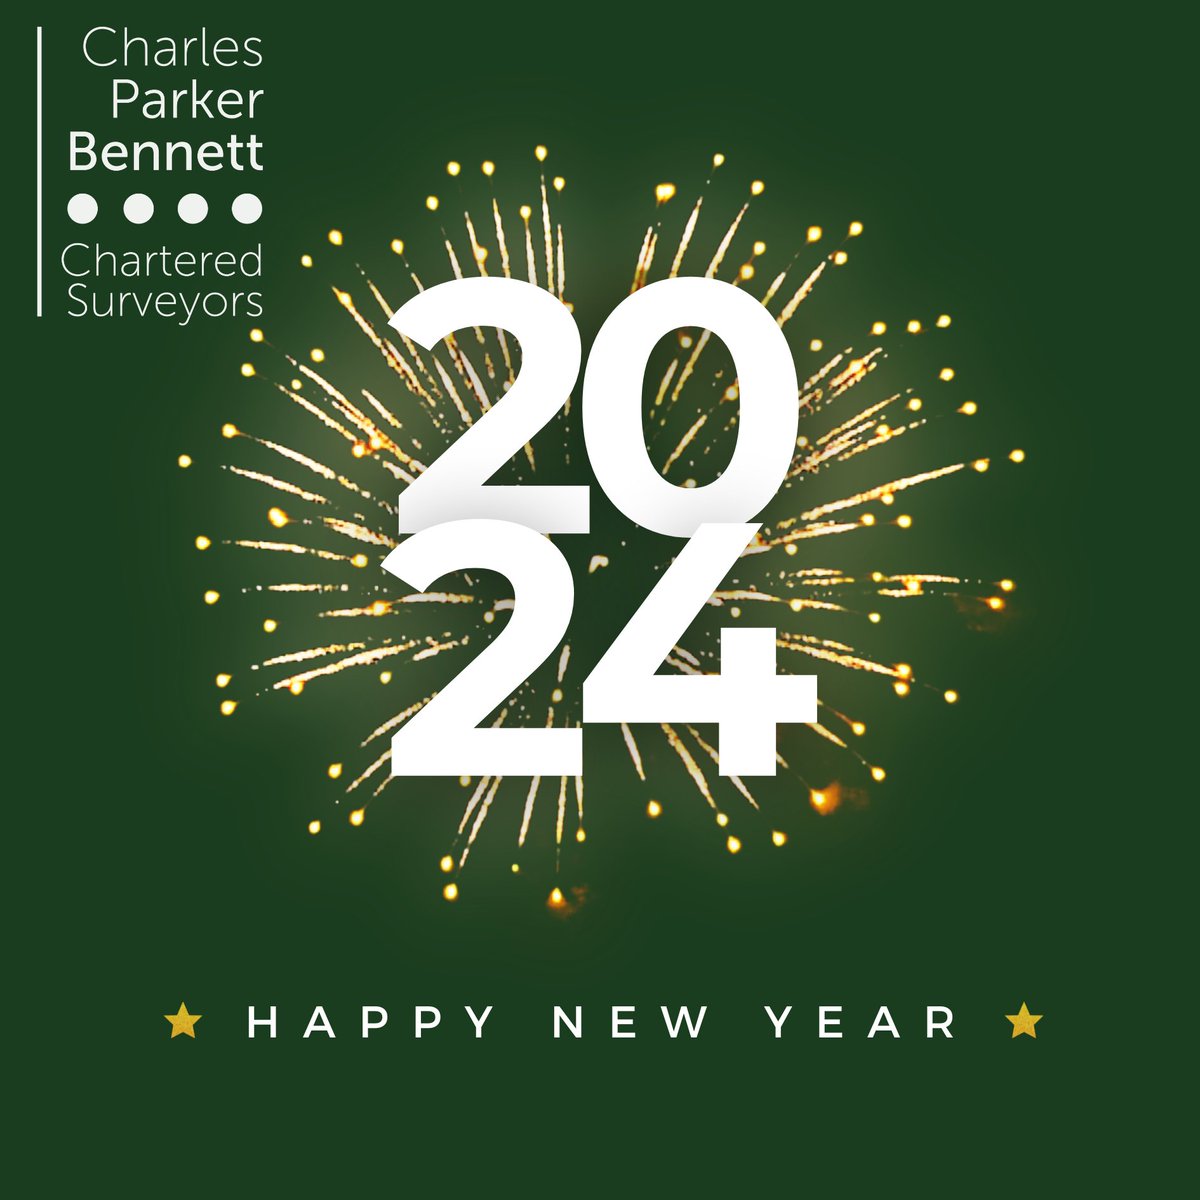 As we see in the New Year, may we take the time to wish all our clients and fellow professionals a happy and prosperous one!

#HappyNewYear #NewYear #NewClients #ParkinsonRealEstate #CharlesParkerBennett